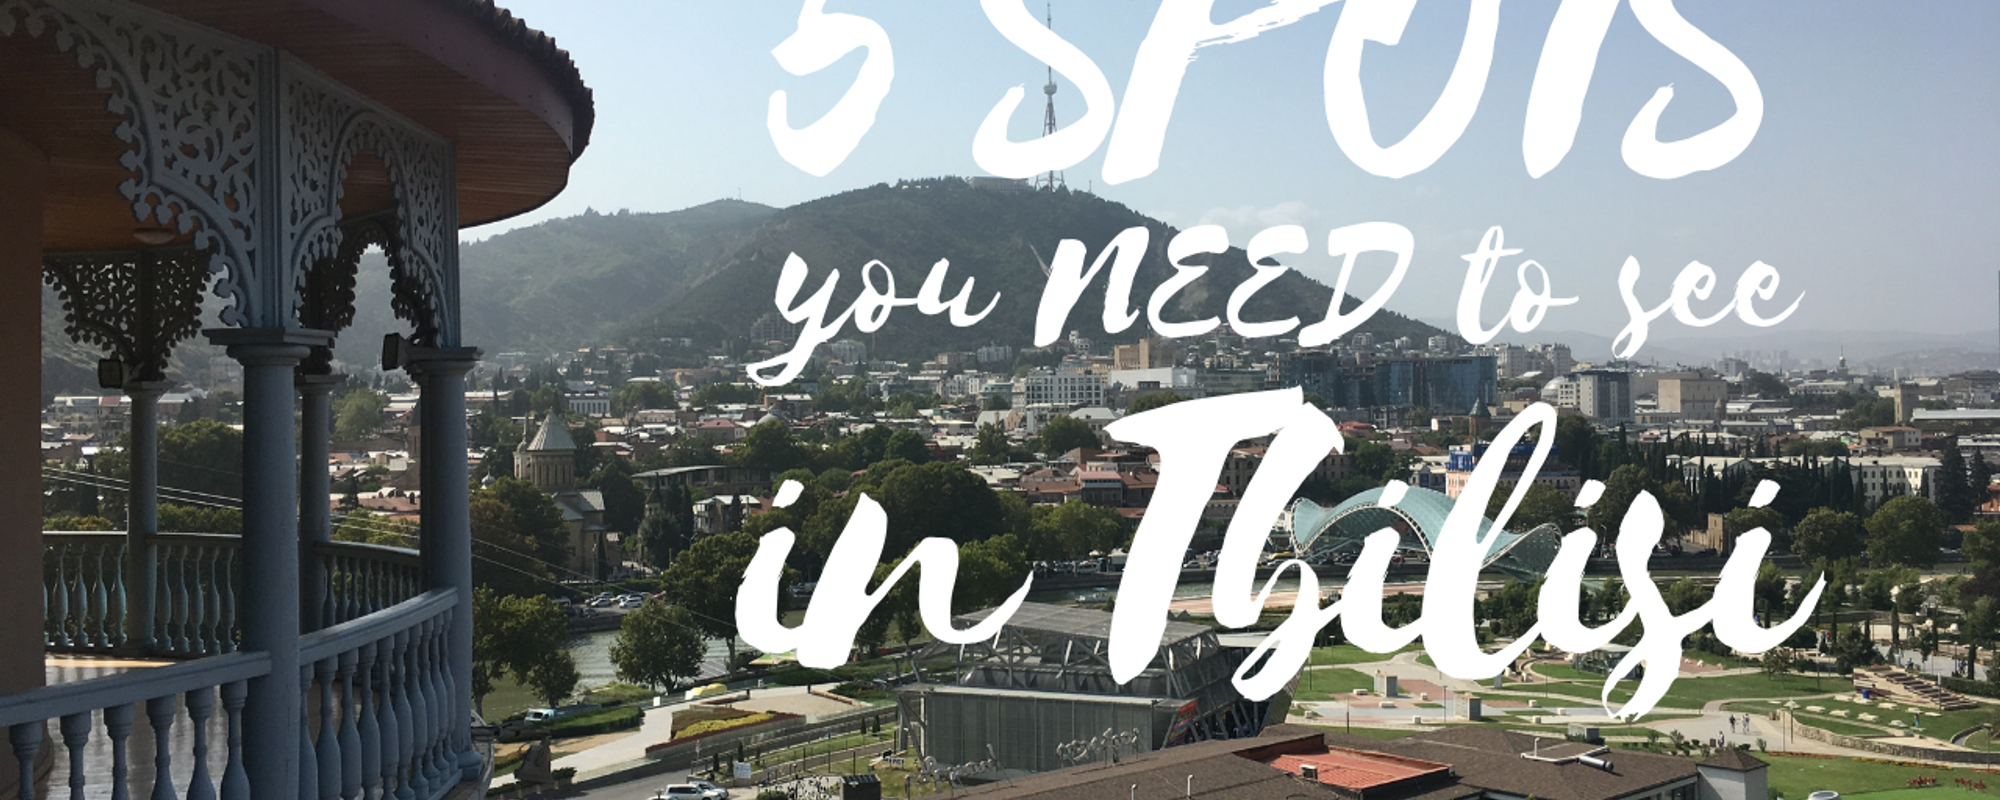 5 spots you need to see in Tbilisi - Georgia